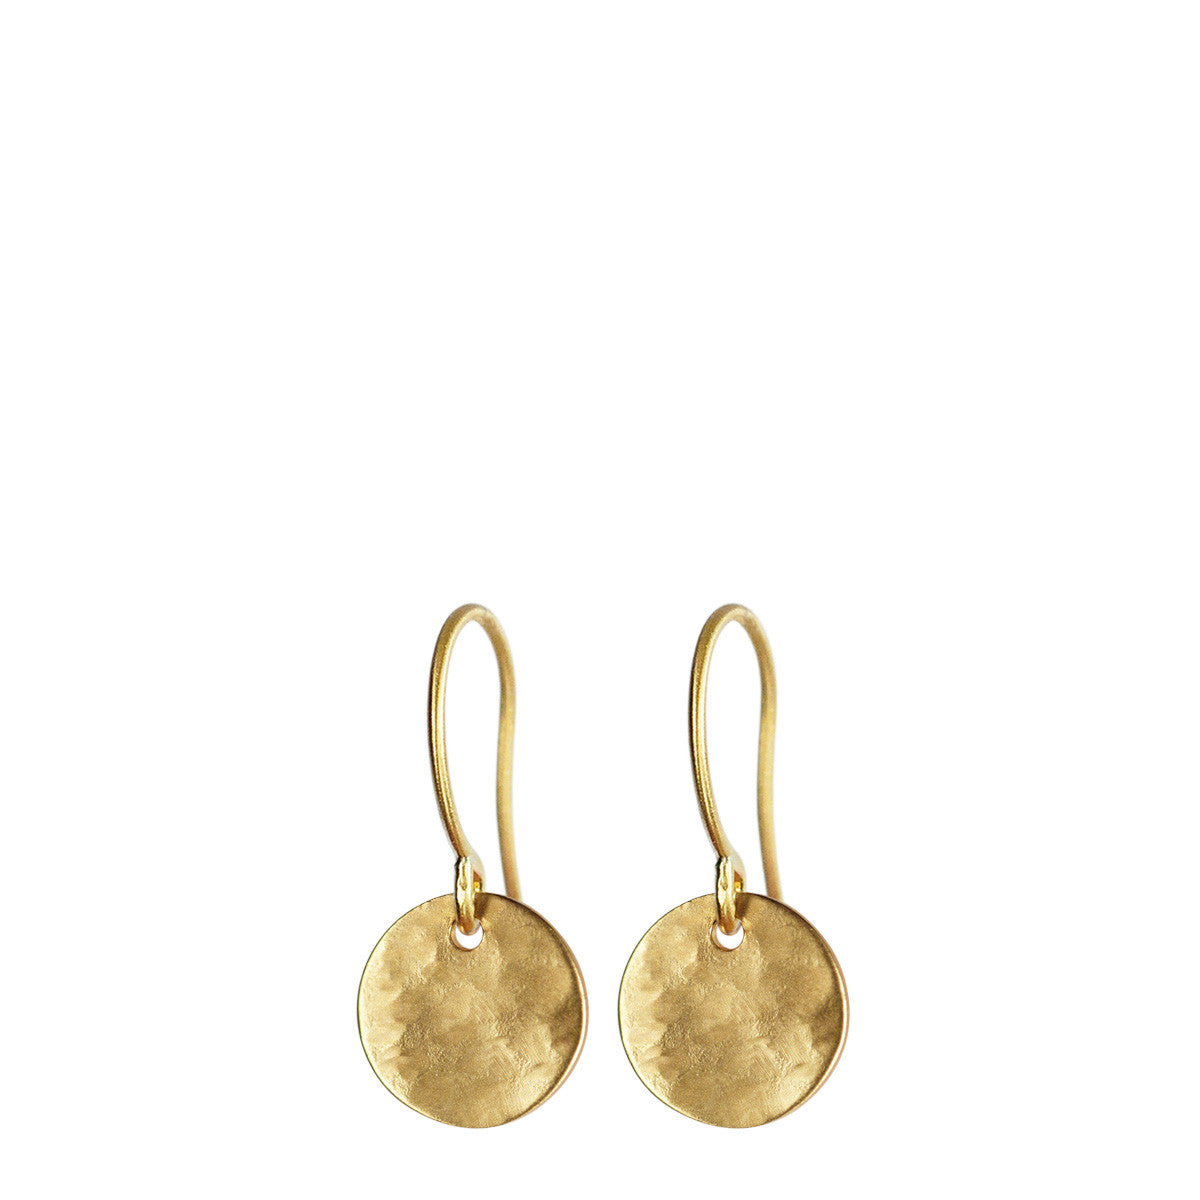 Hammered Concave Gold Earrings - Creative Jewelry by Marcia